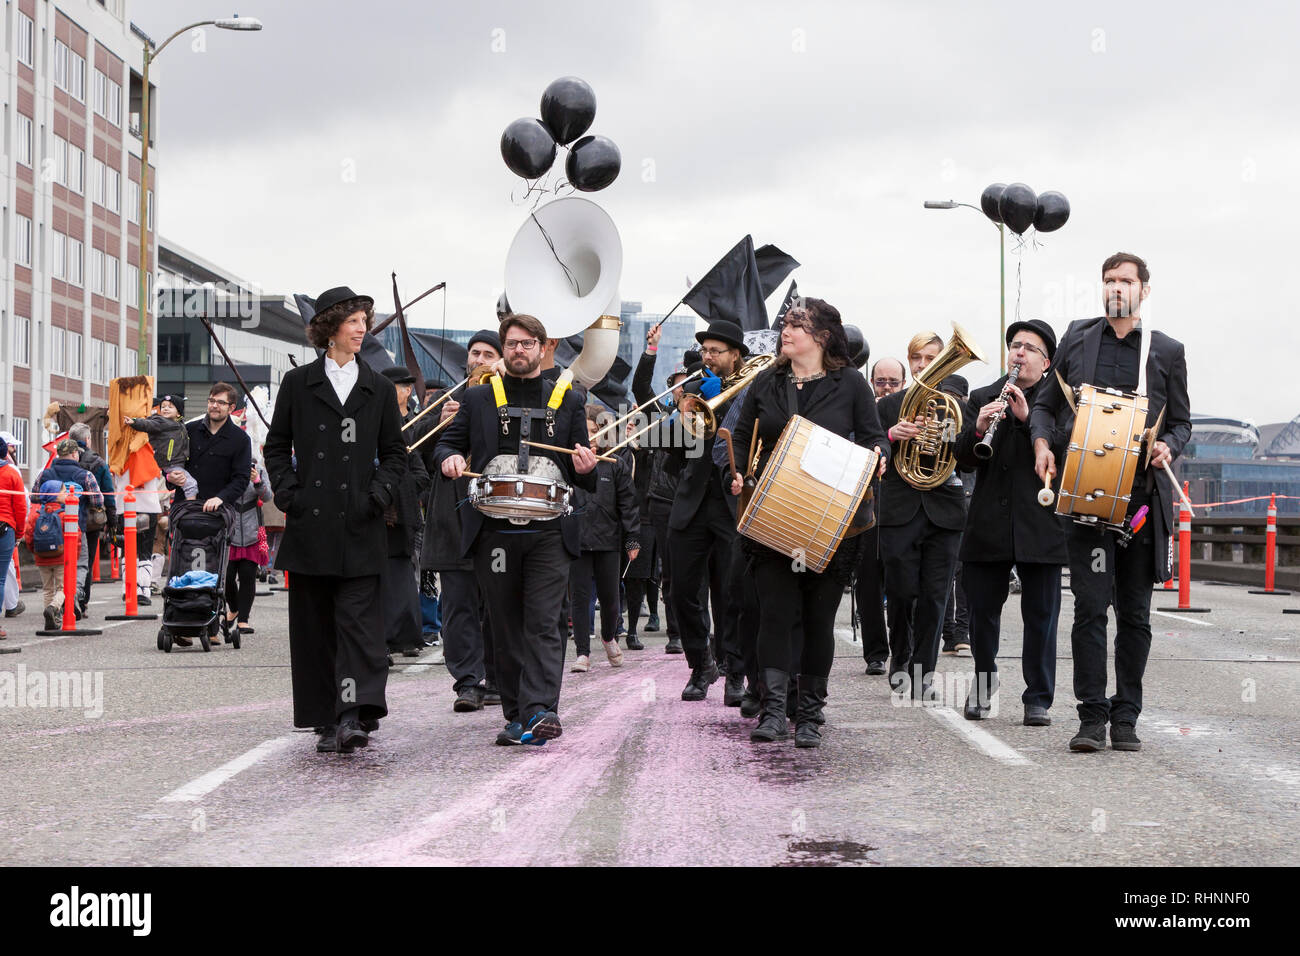 Seattle, Washington, USA. 2nd February, 2019. Orkestar Zirkonium and Friends brass-and-drum band, dressed in black to mourn the loss of the landmark road, leads a procession along the closed Alaskan Way Viaduct. An estimated 70,000 people attended the Hello Goodbye: Viaduct Arts Festival as part of the grand opening of the state-of-the-art tunnel spanning two-miles under downtown. The festival, which took place on the elevated highway, began with a processional featuring music and performances from regional artists and organizations. Credit: Paul Christian Gordon/Alamy Live News Stock Photo